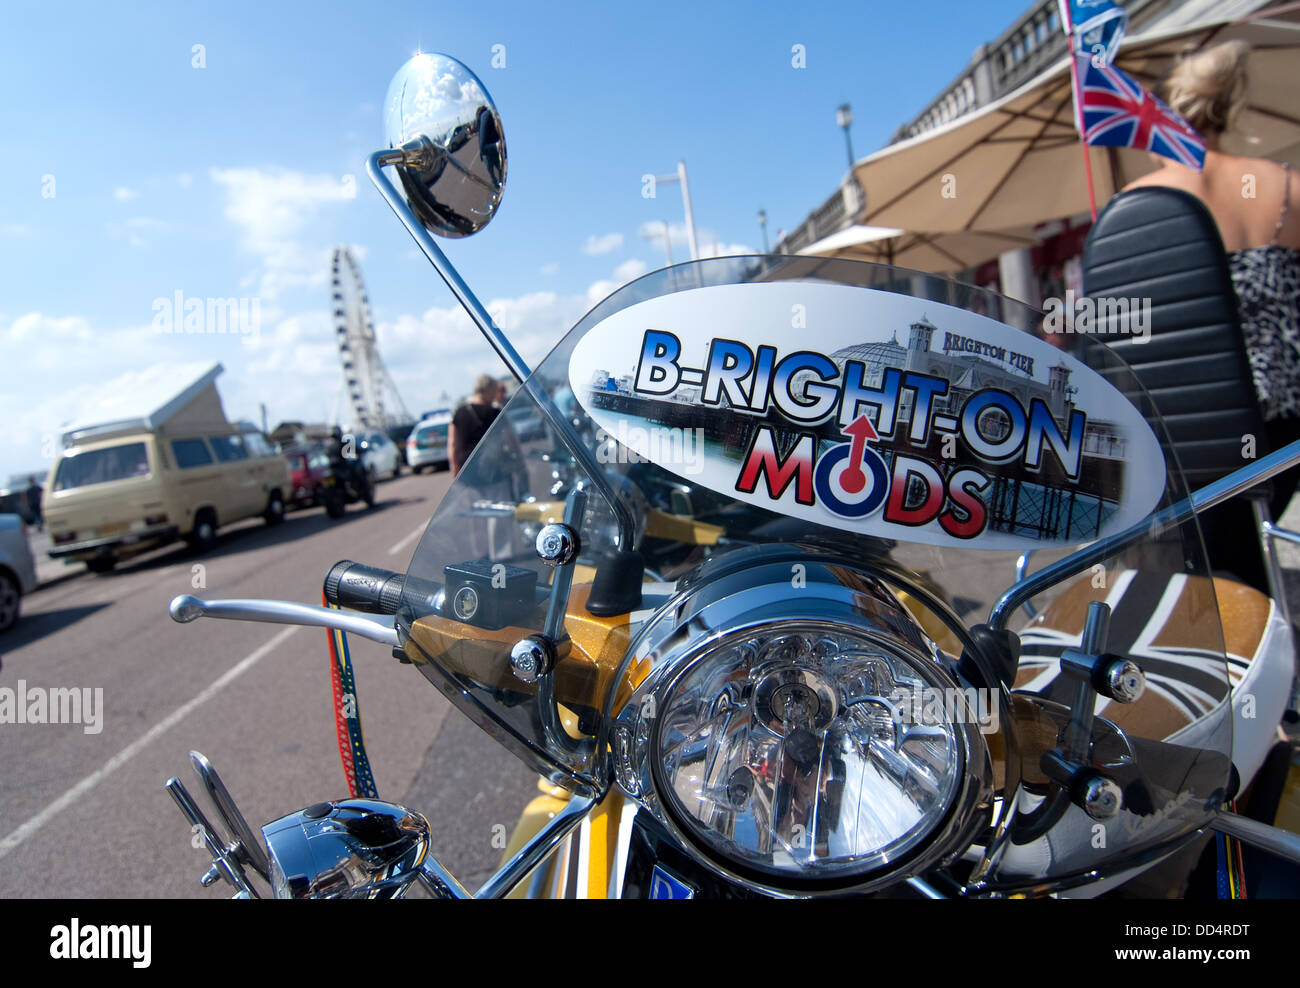 Hundreds of Mods visit The Seaside town of Brighton as the Mod Scene returns to its spiritual home. Stock Photo